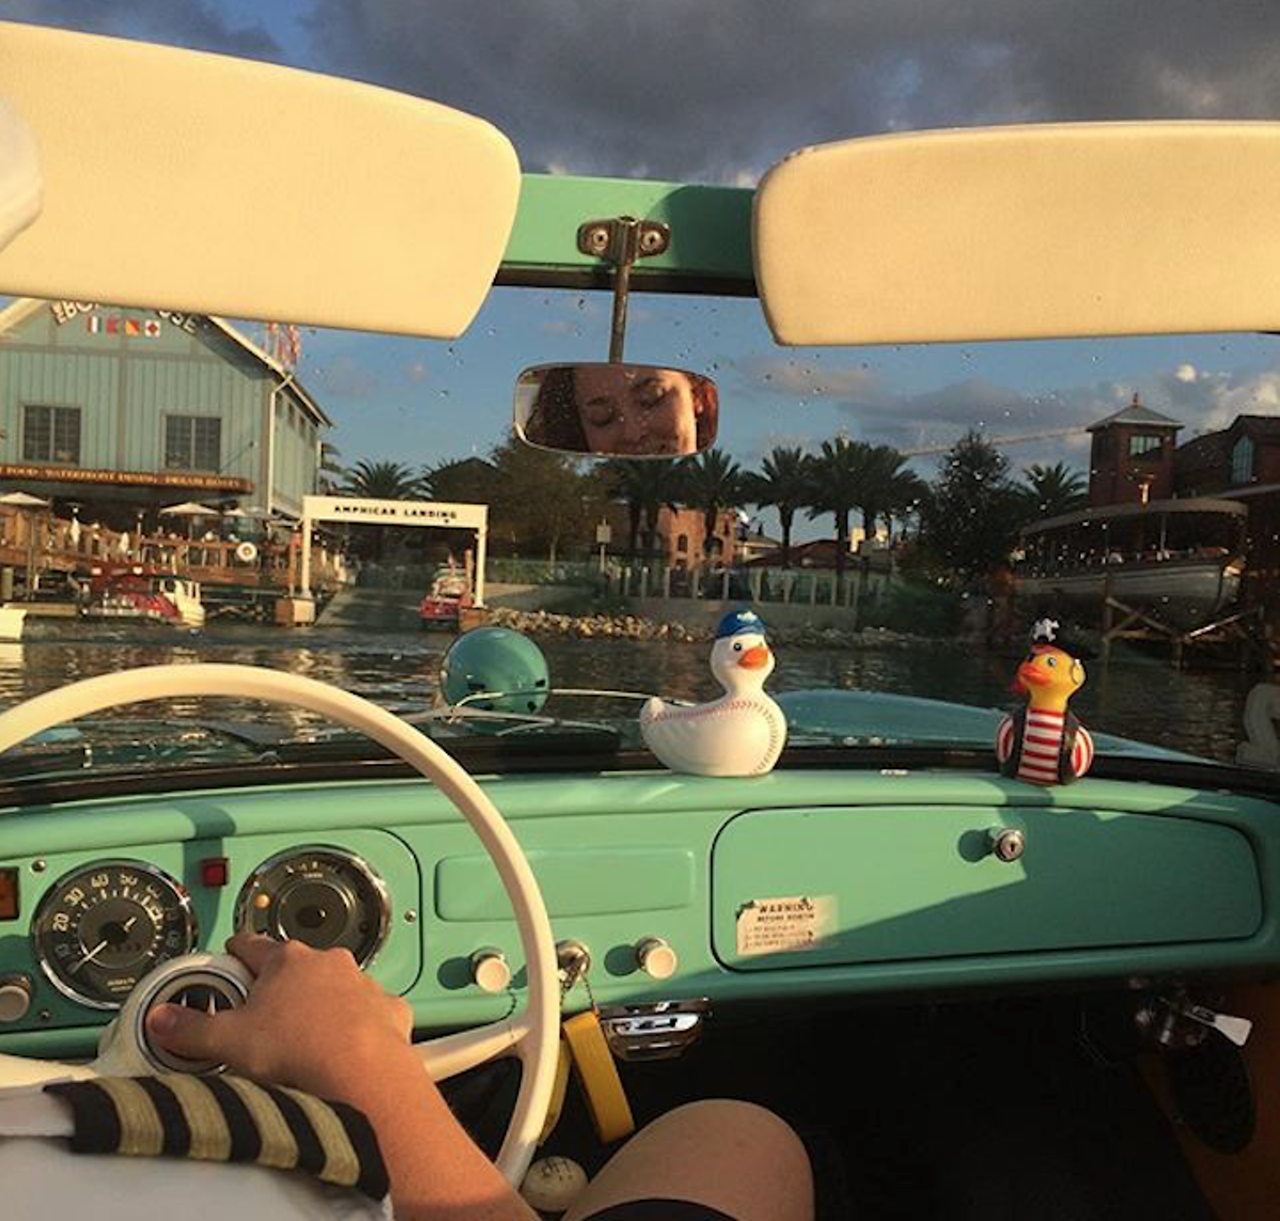 15. Ride on a Amphicar at Disney Springs' Boat House
Chicks dig car-boats, am I right? Right? 
Photo via yodelexiehoo/Instagram